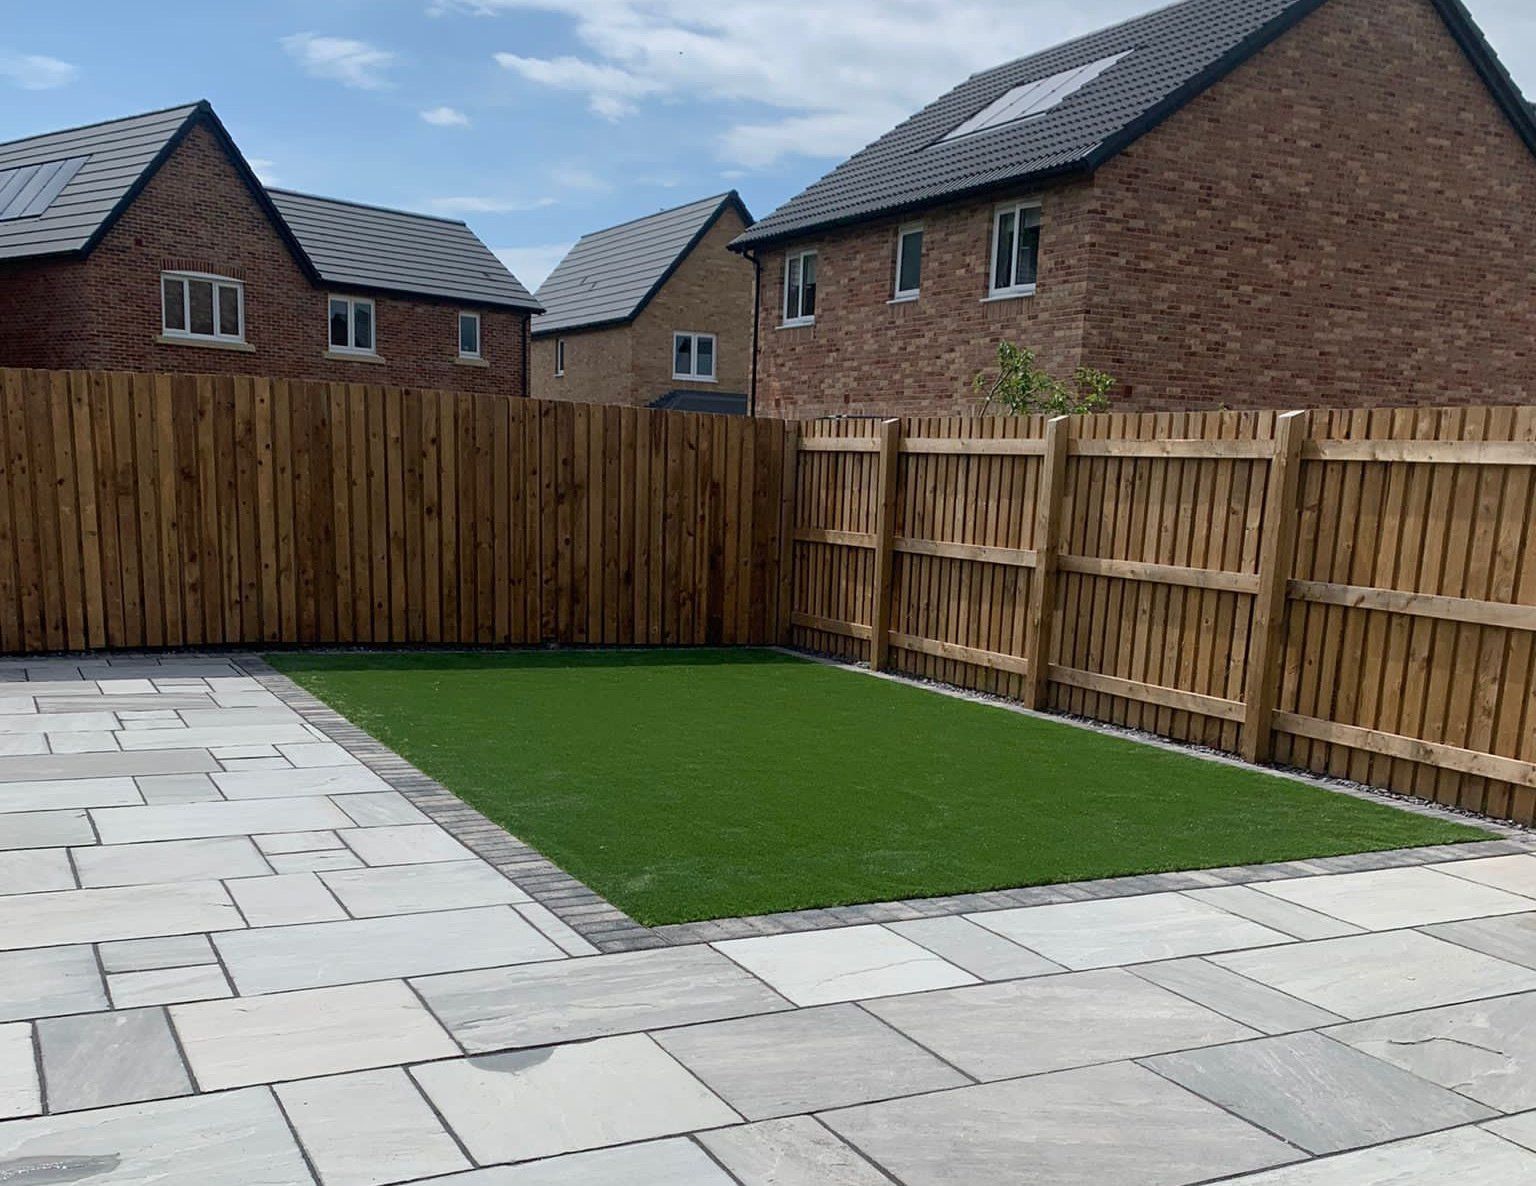 Landscaping and Artificial Lawns Bamber Bridge by Local Driveay Company